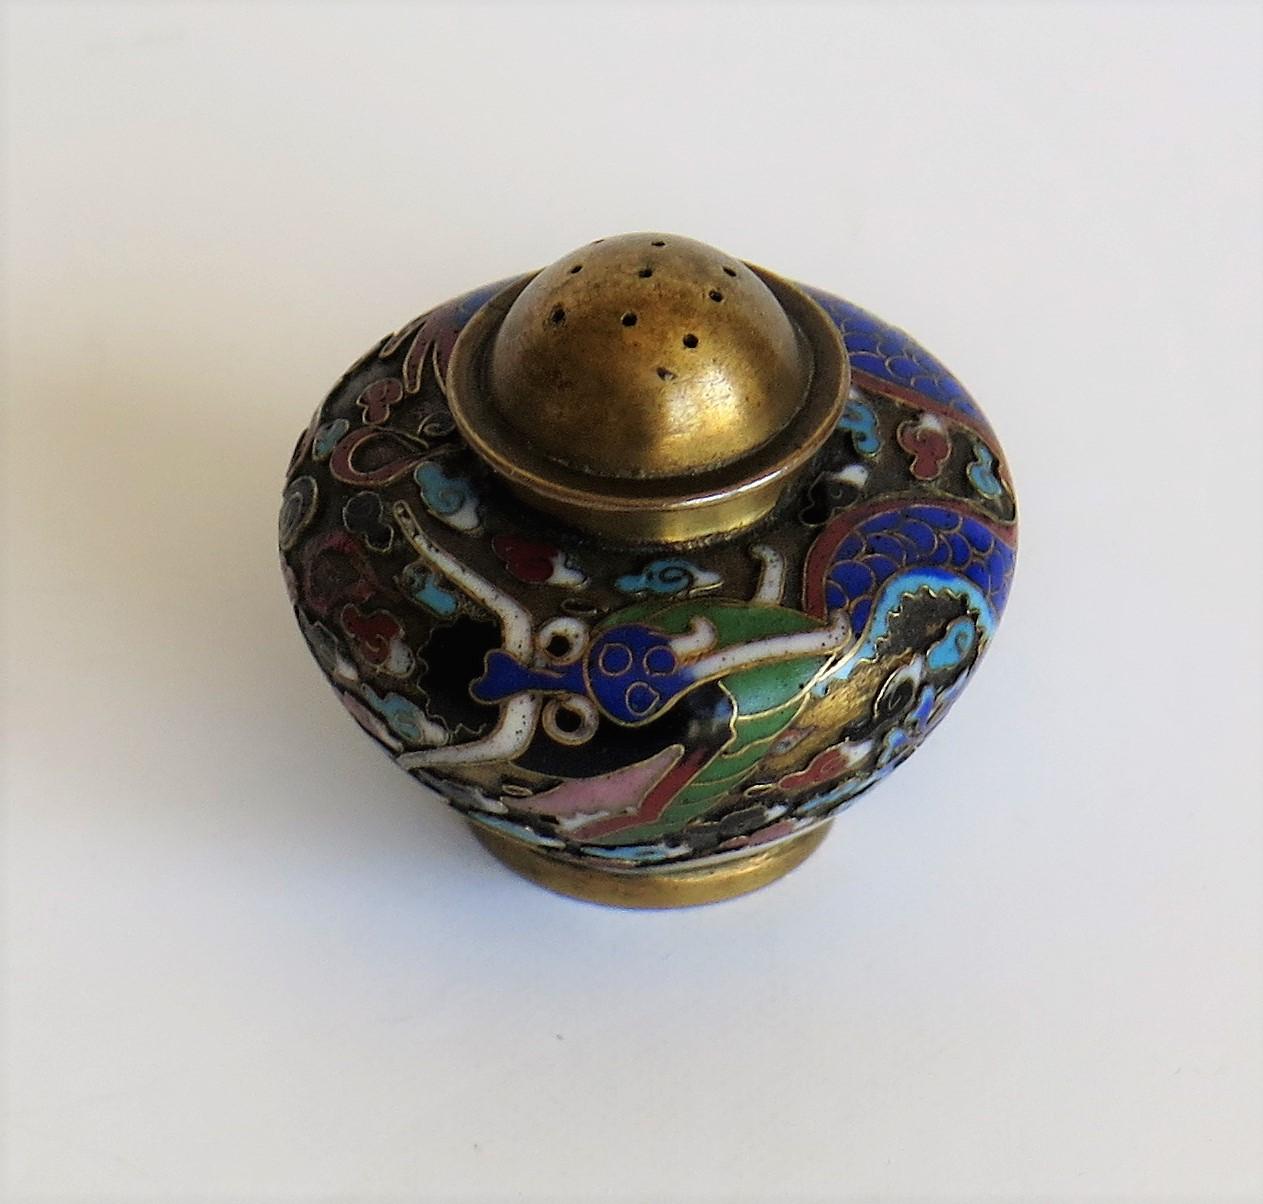 Cloissoné 19th Century Chinese Cloisonné Pepper Pot with Dragon Decoration, Qing Dynasty